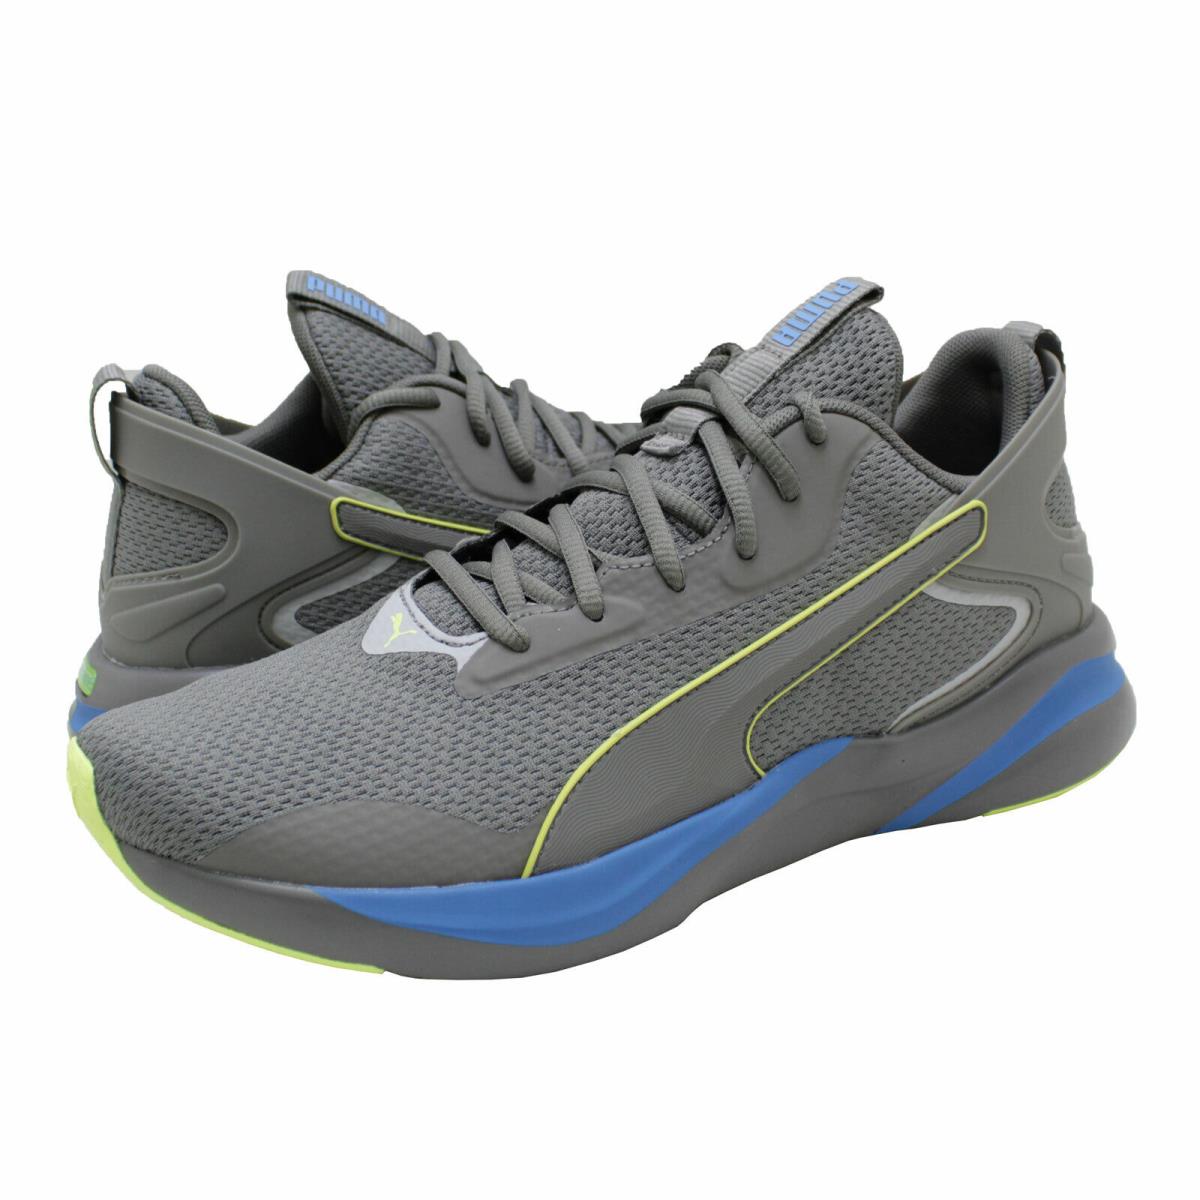 Men`s Shoes Puma Softride Rift Tech Running Athletic Sneakers 193737-04 Gray